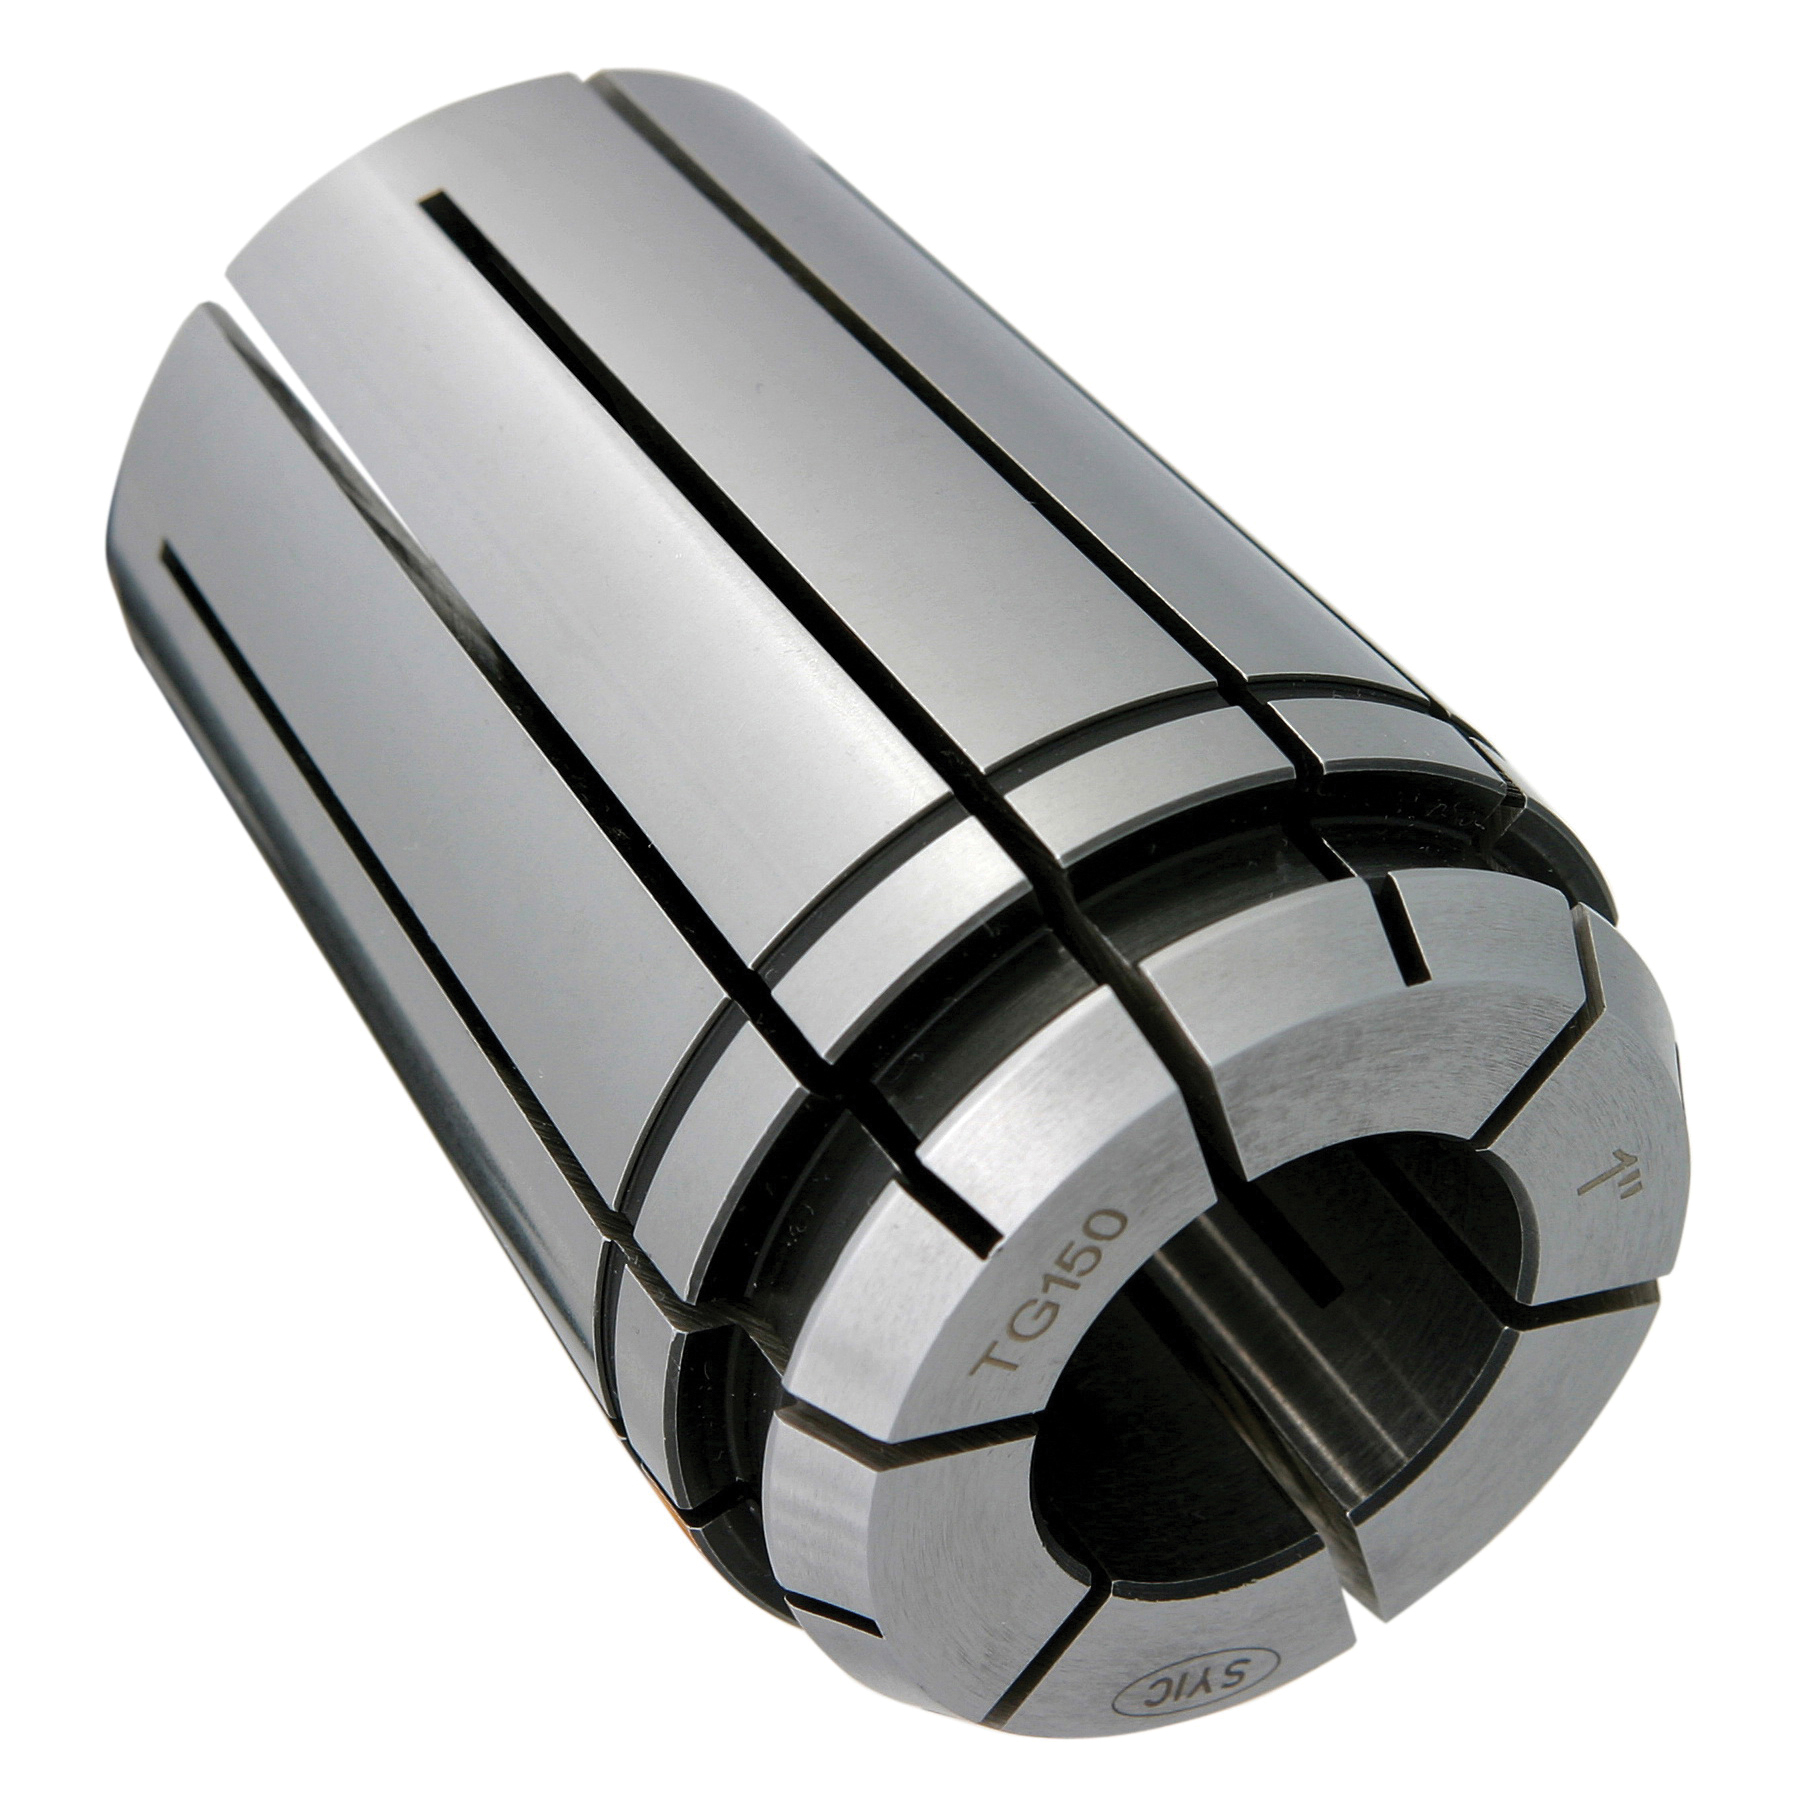 TG150 1-21/64" COLLET